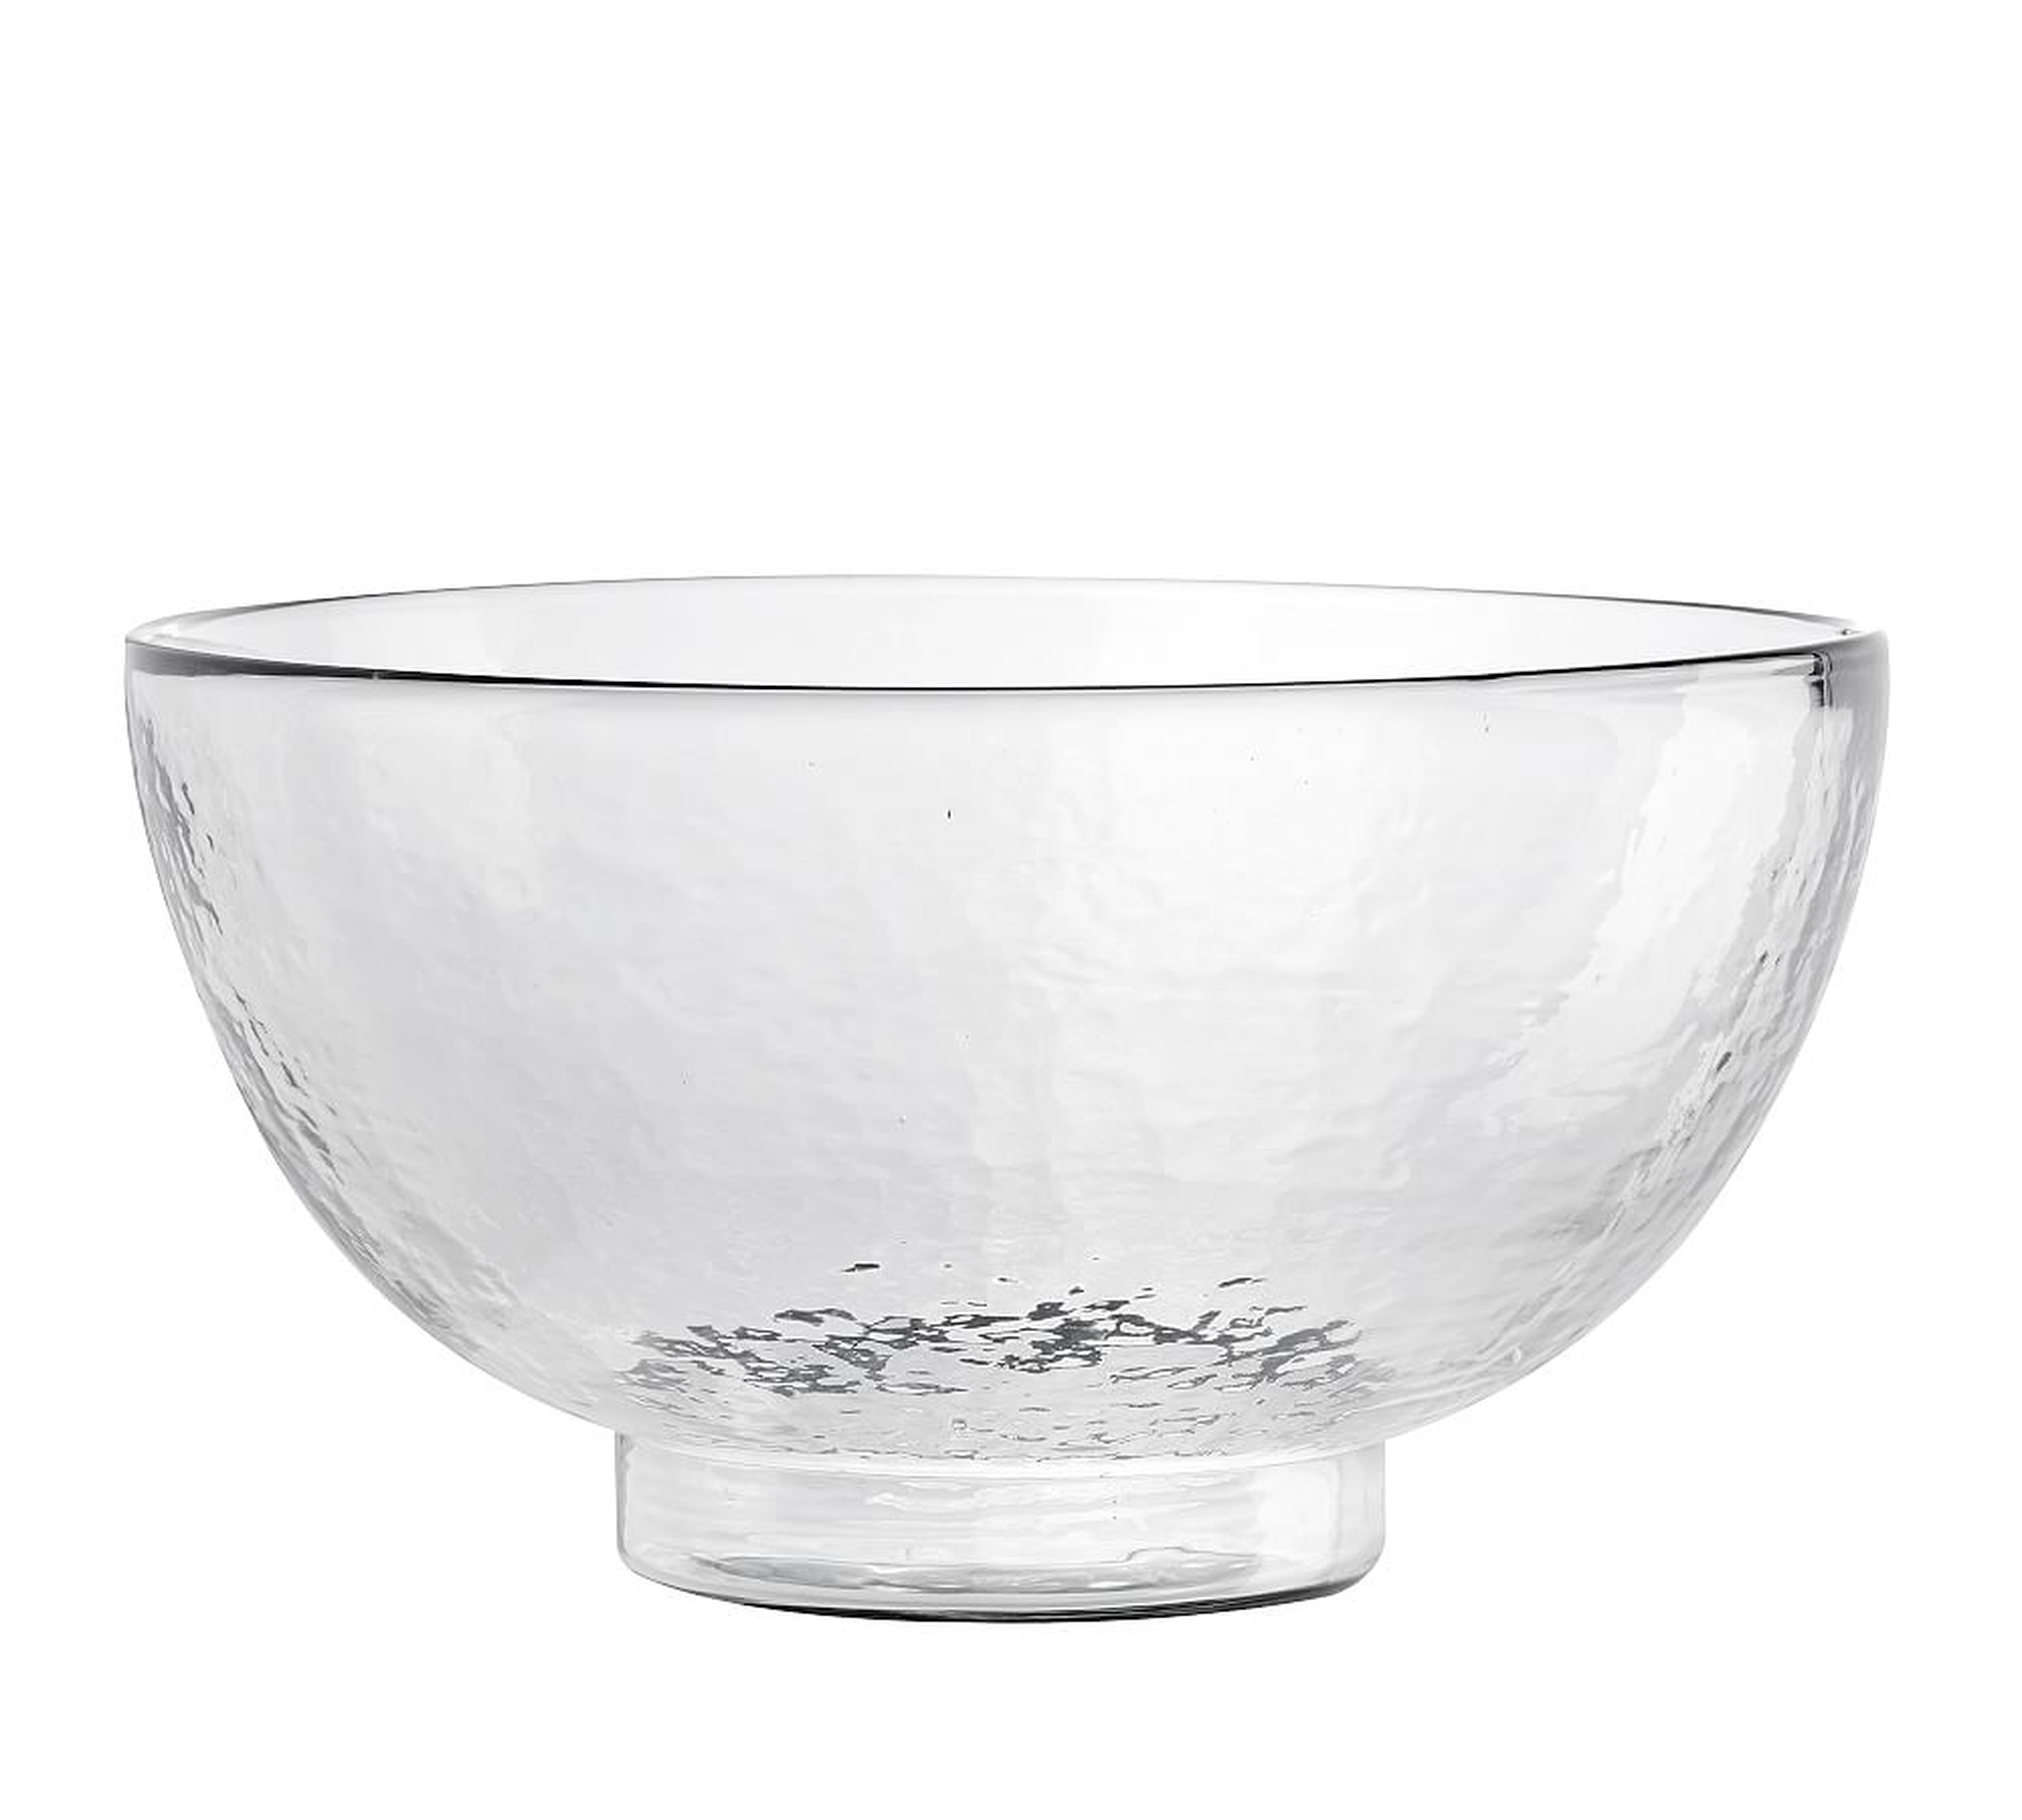 Hammered Glass Serving Bowl - Large - Pottery Barn